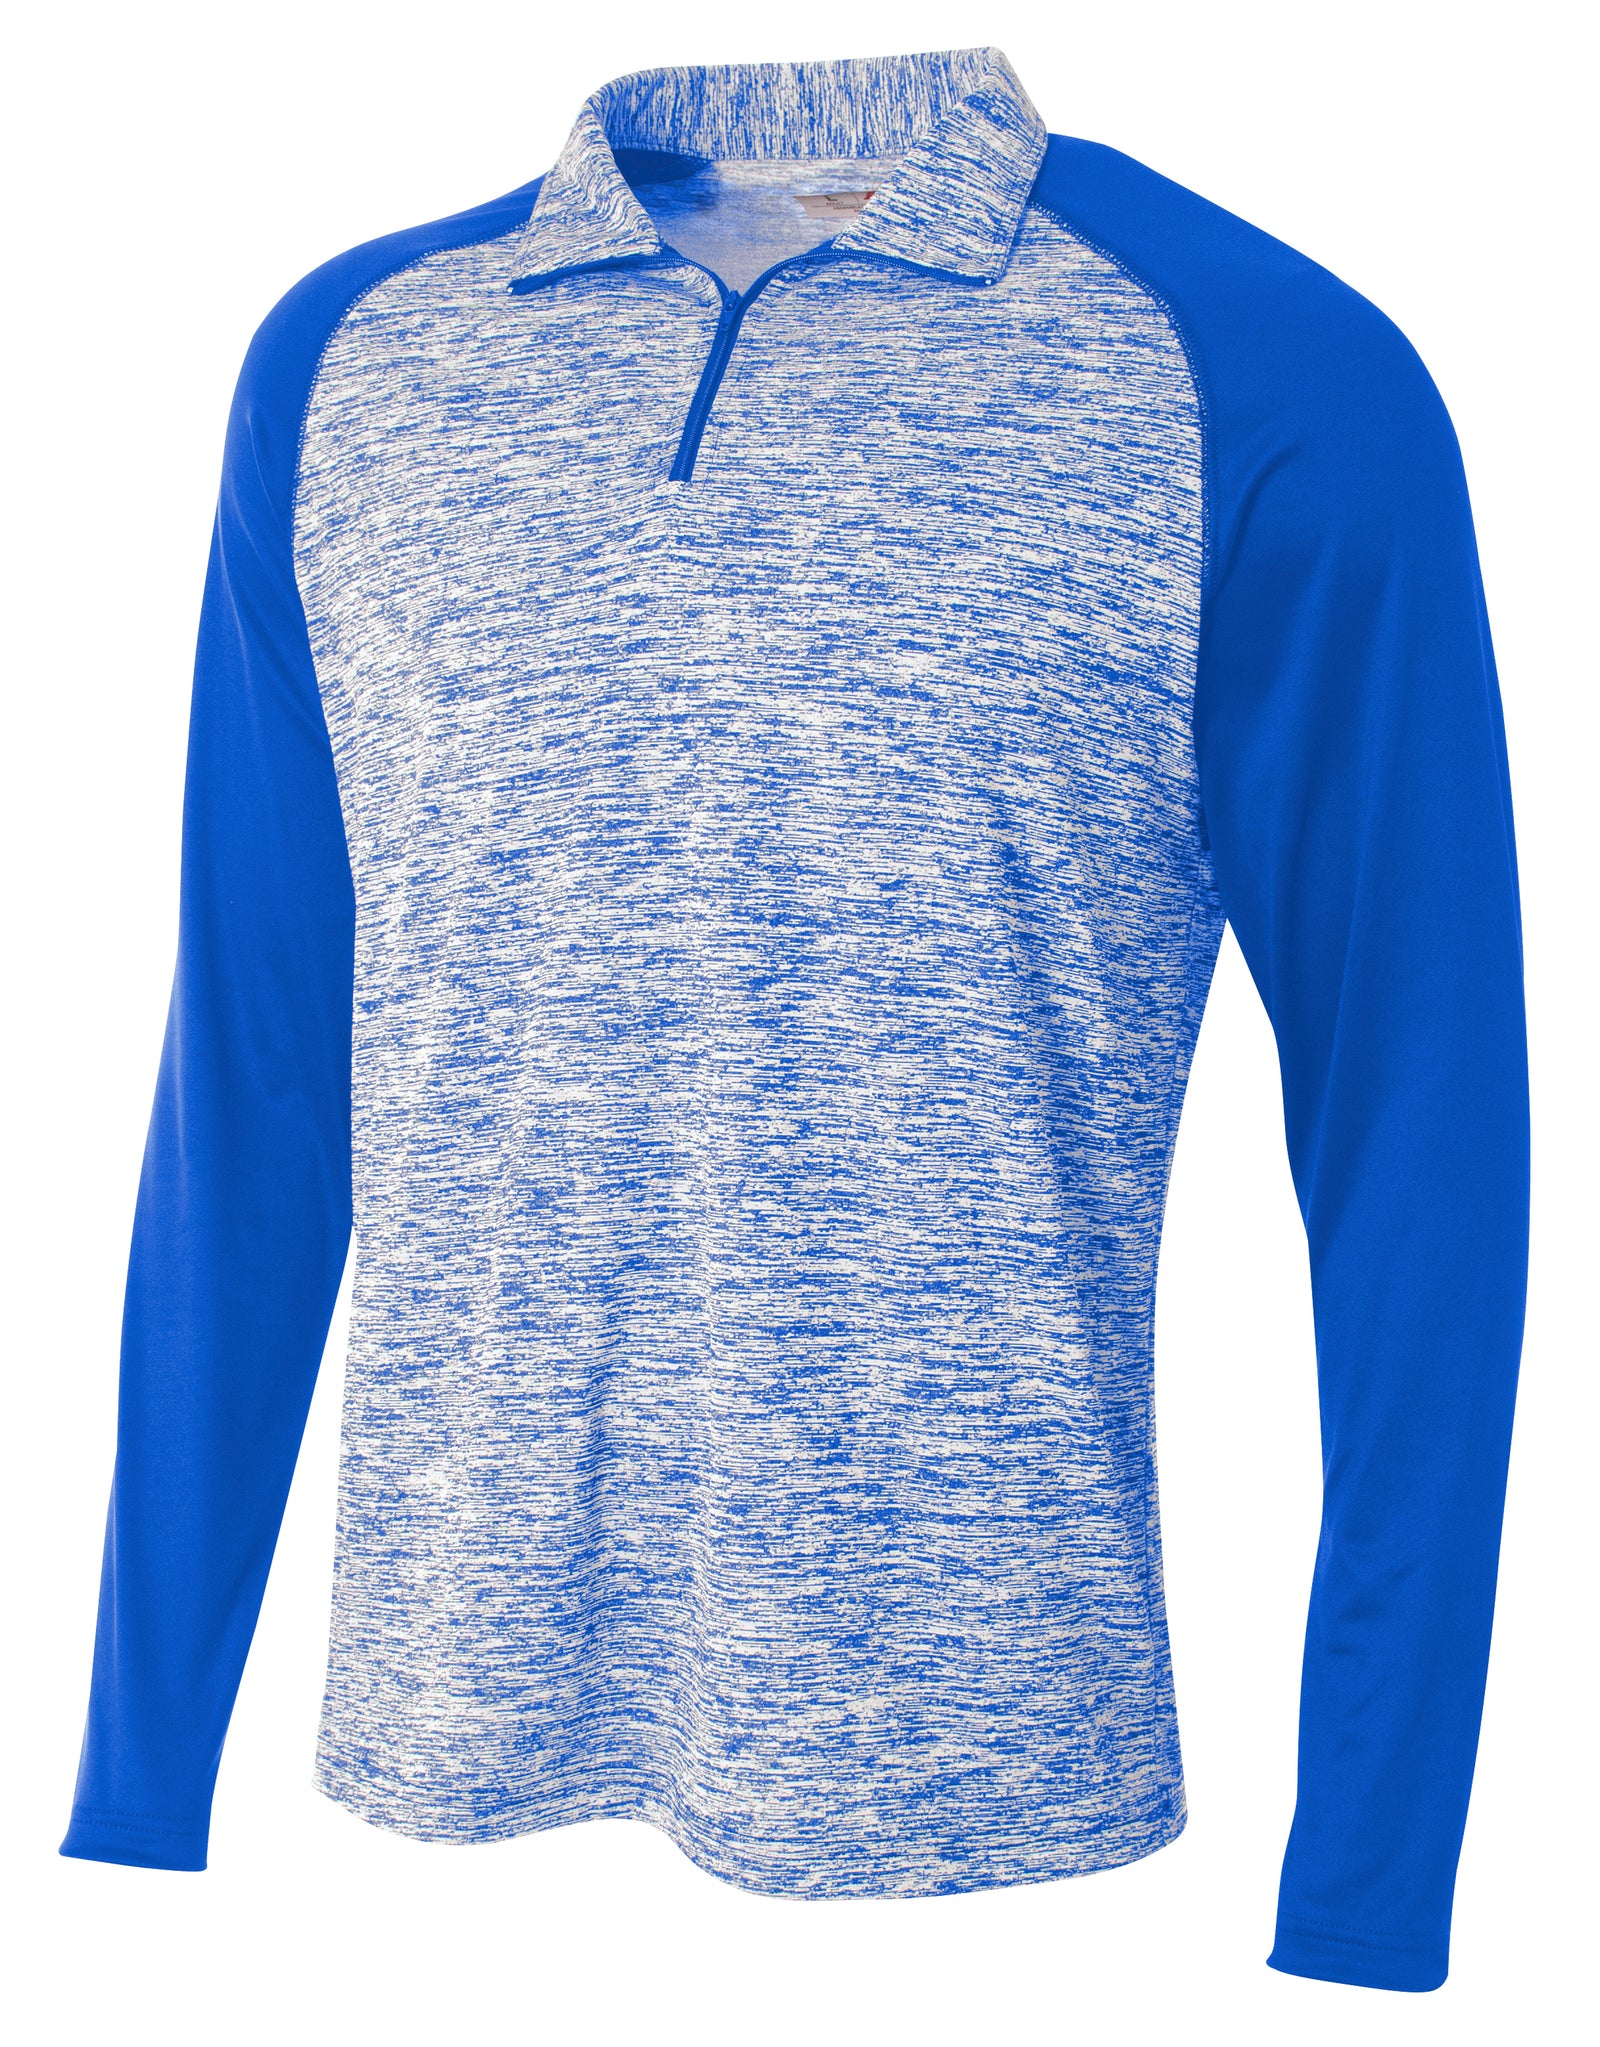 Royal A4 1/4 Zip Space Dye With Contrast